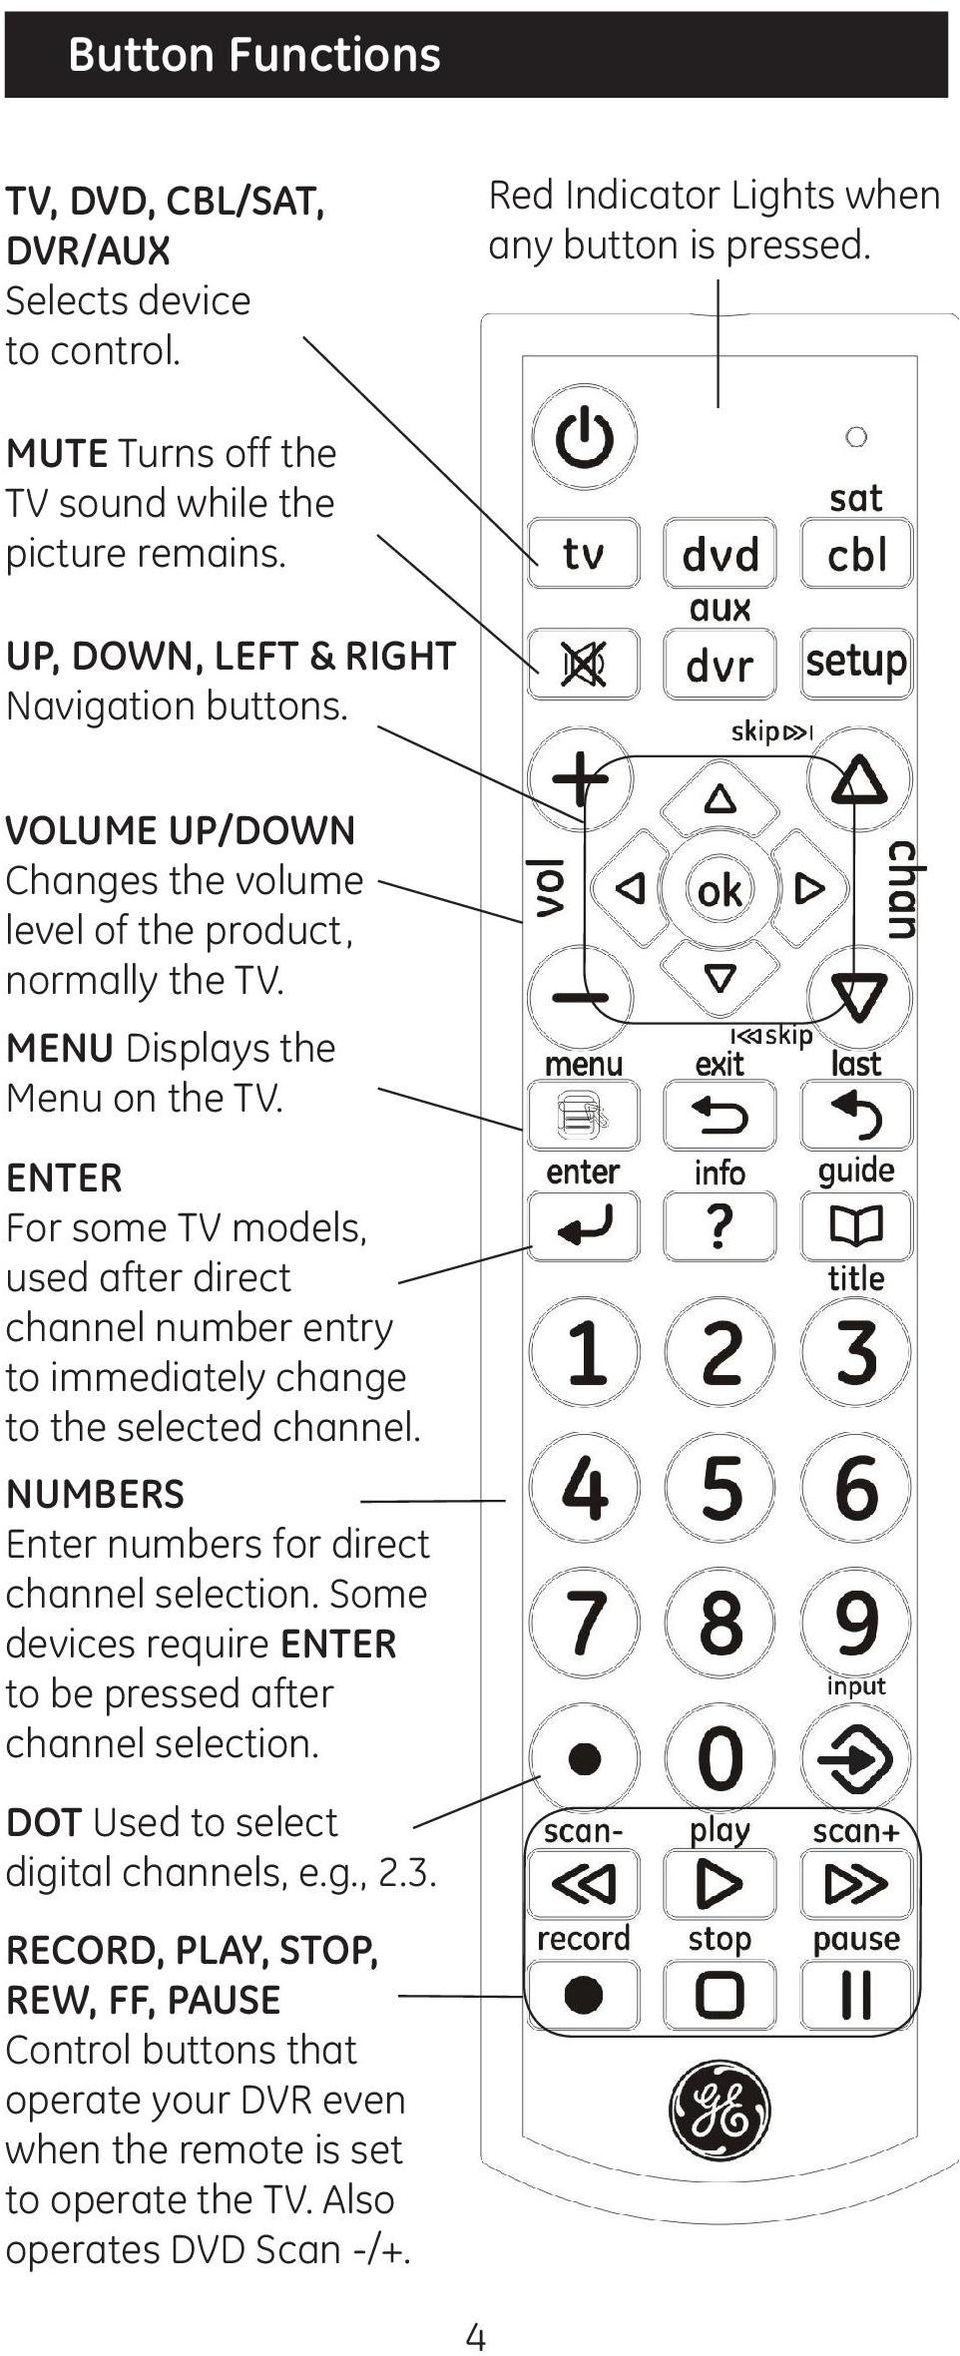 ENTER For some TV models, used after direct channel number entry to immediately change to the selected channel. NUMBERS Enter numbers for direct channel selection.